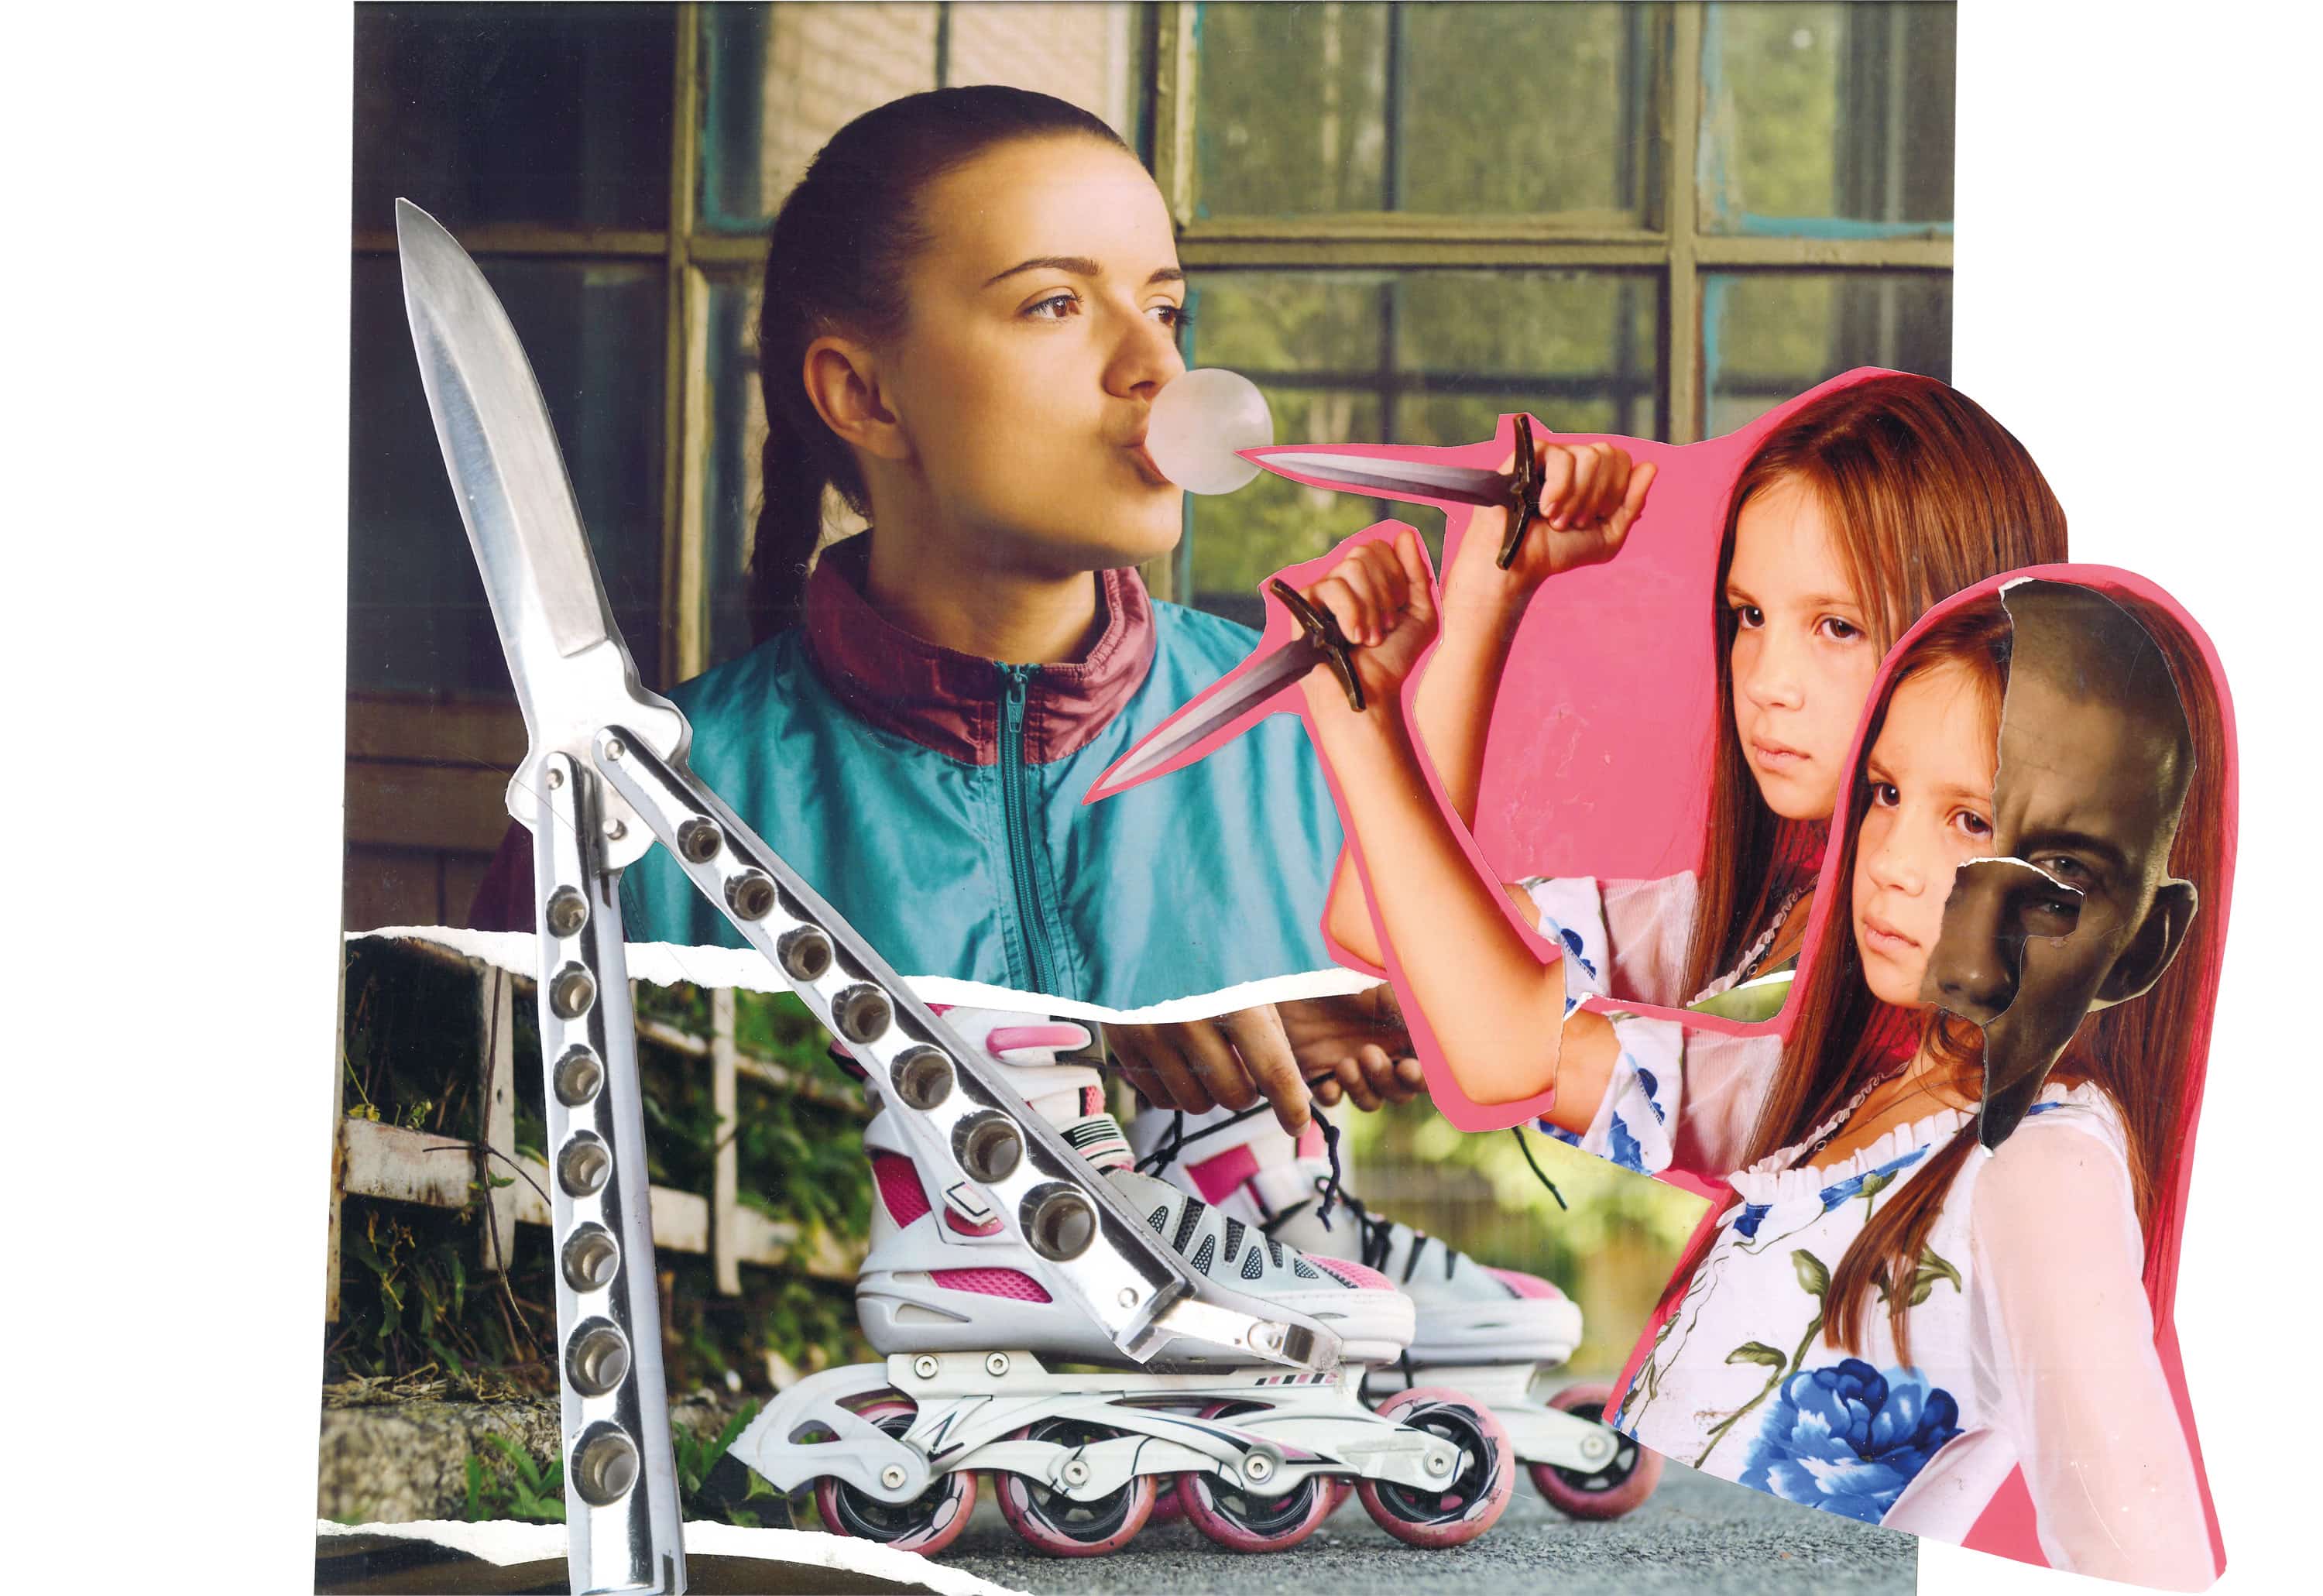 Singful 90s, collage by Roman Mikhaylov